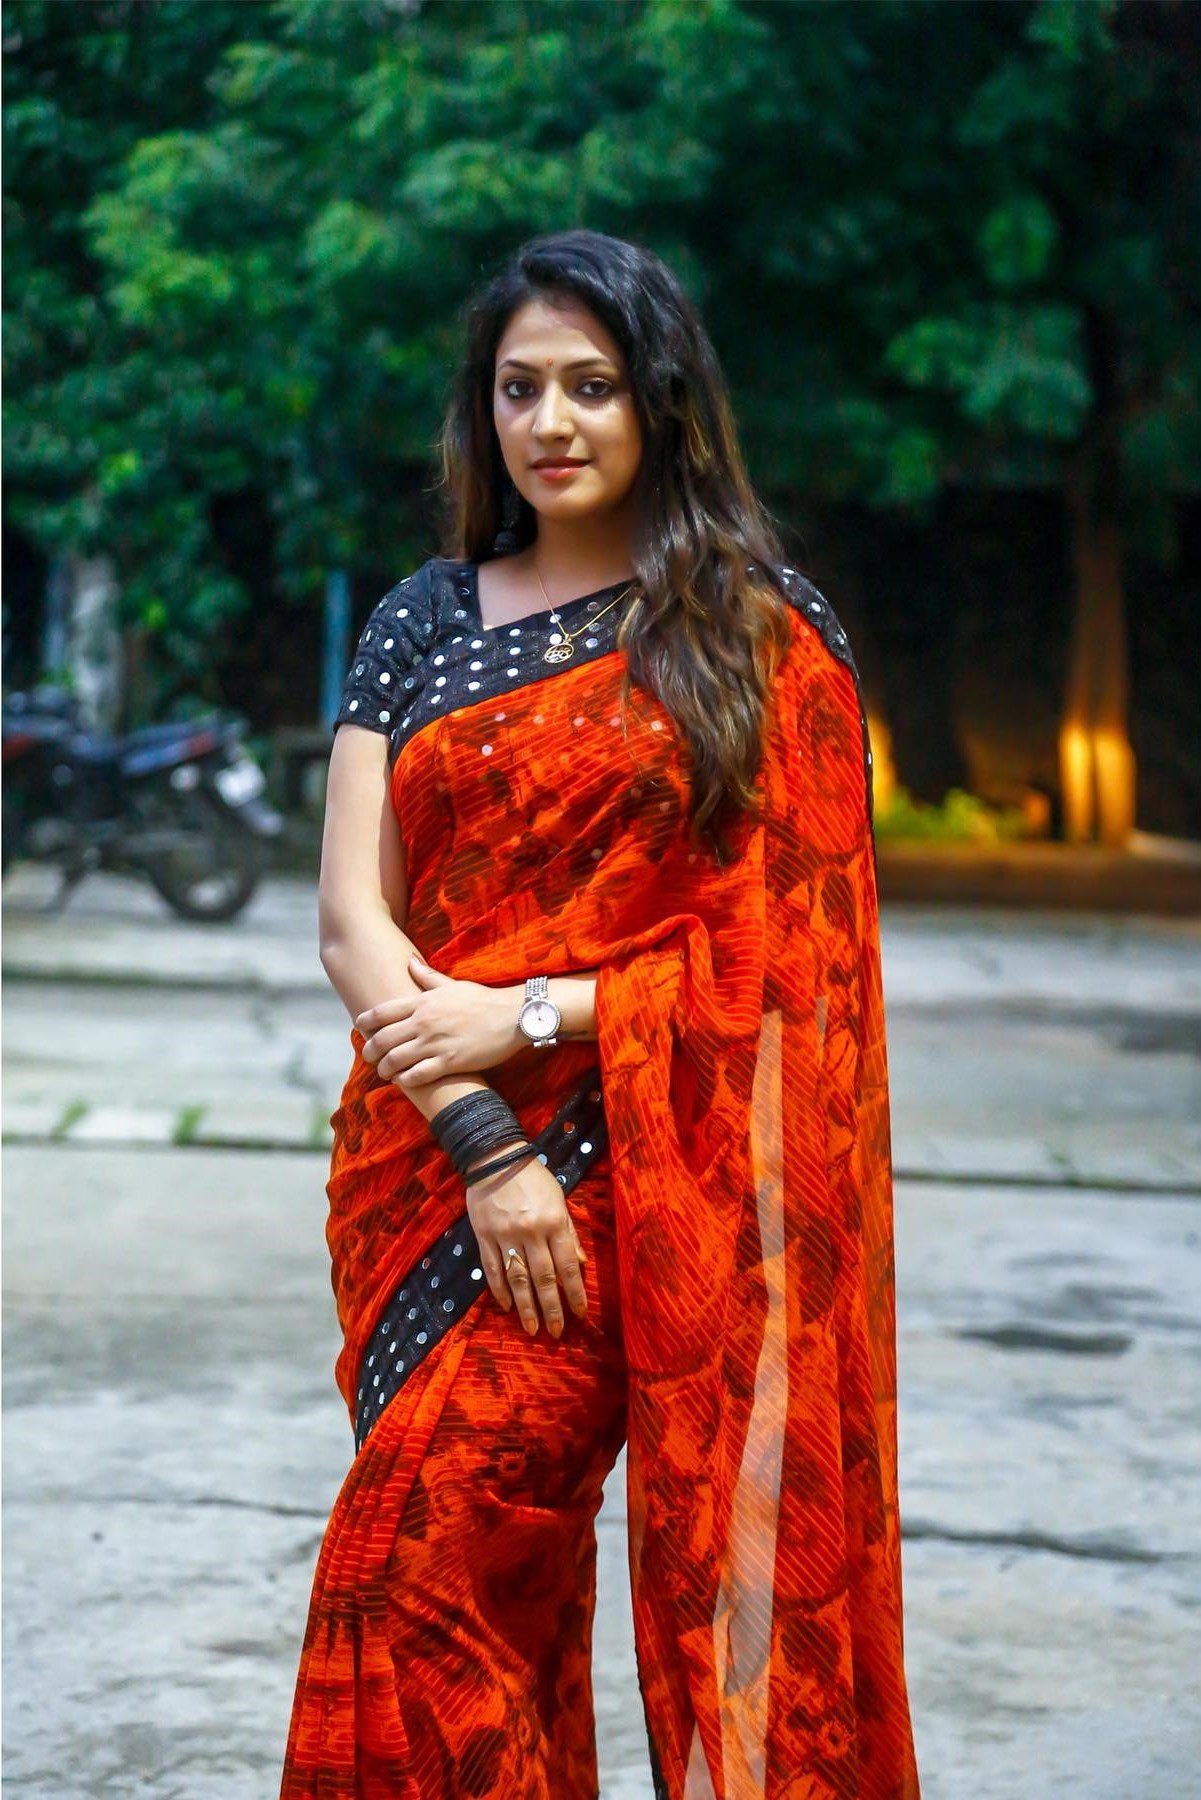 Hariprriya In Red & Black Georgette Saree With Mirror Work Blouse Outfits & Fashion